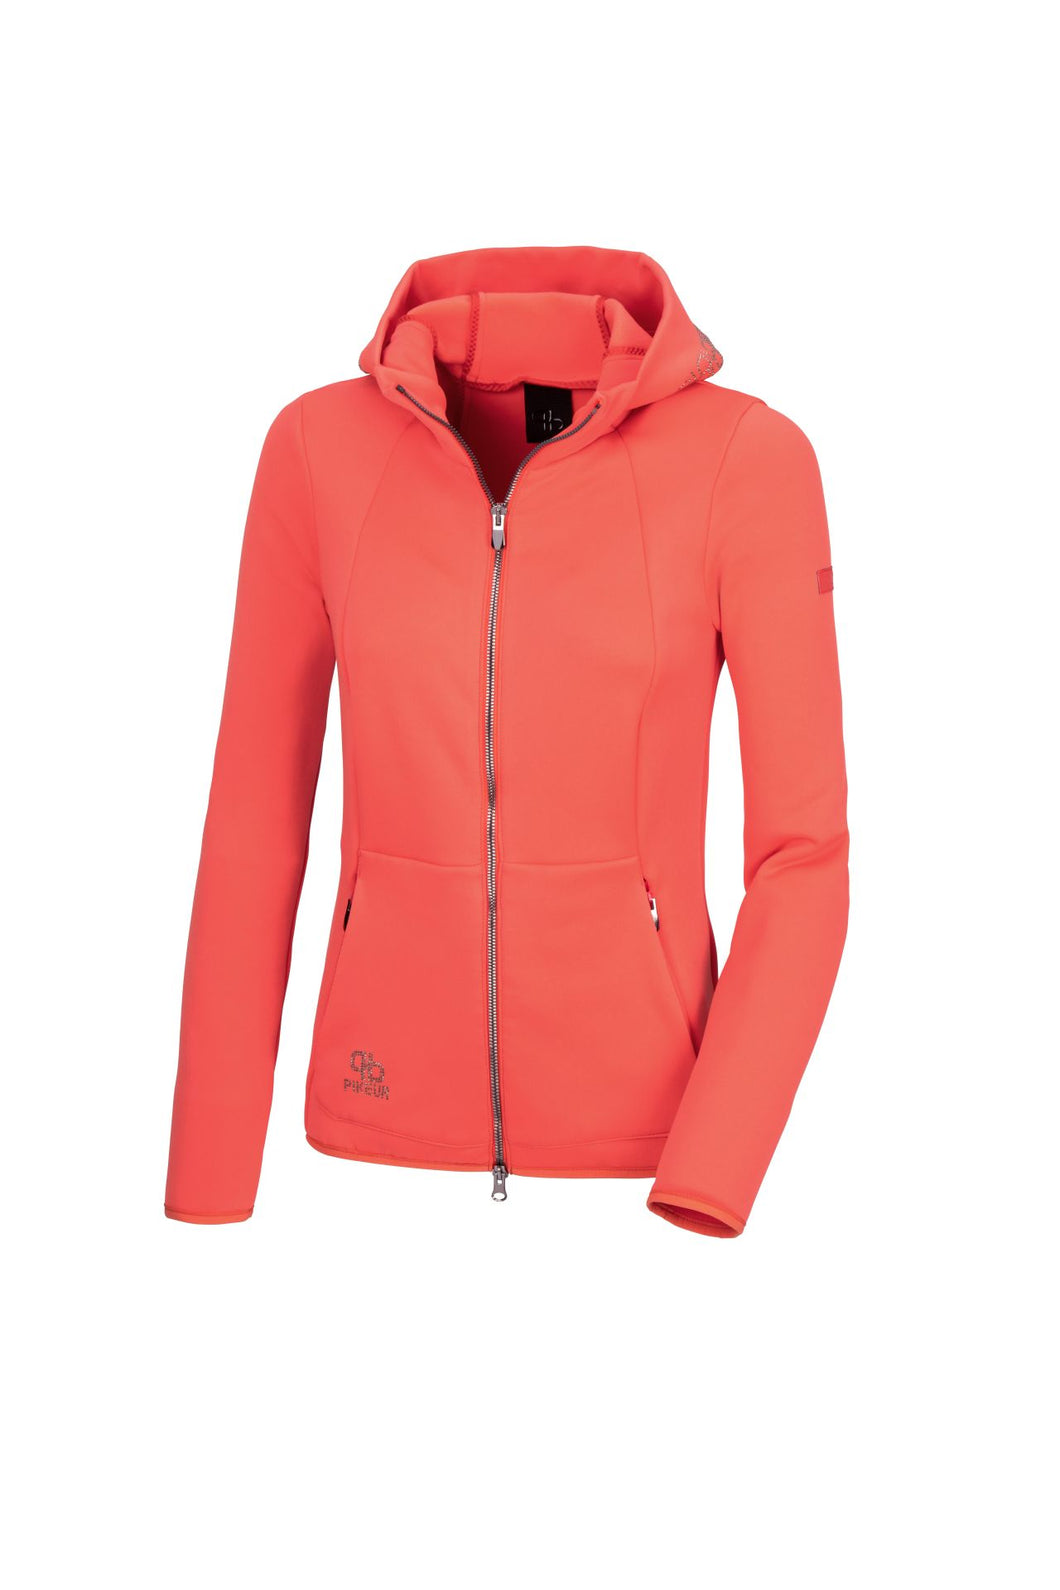 Pikeur Velvet Jacke Selection S/S 23 coral red